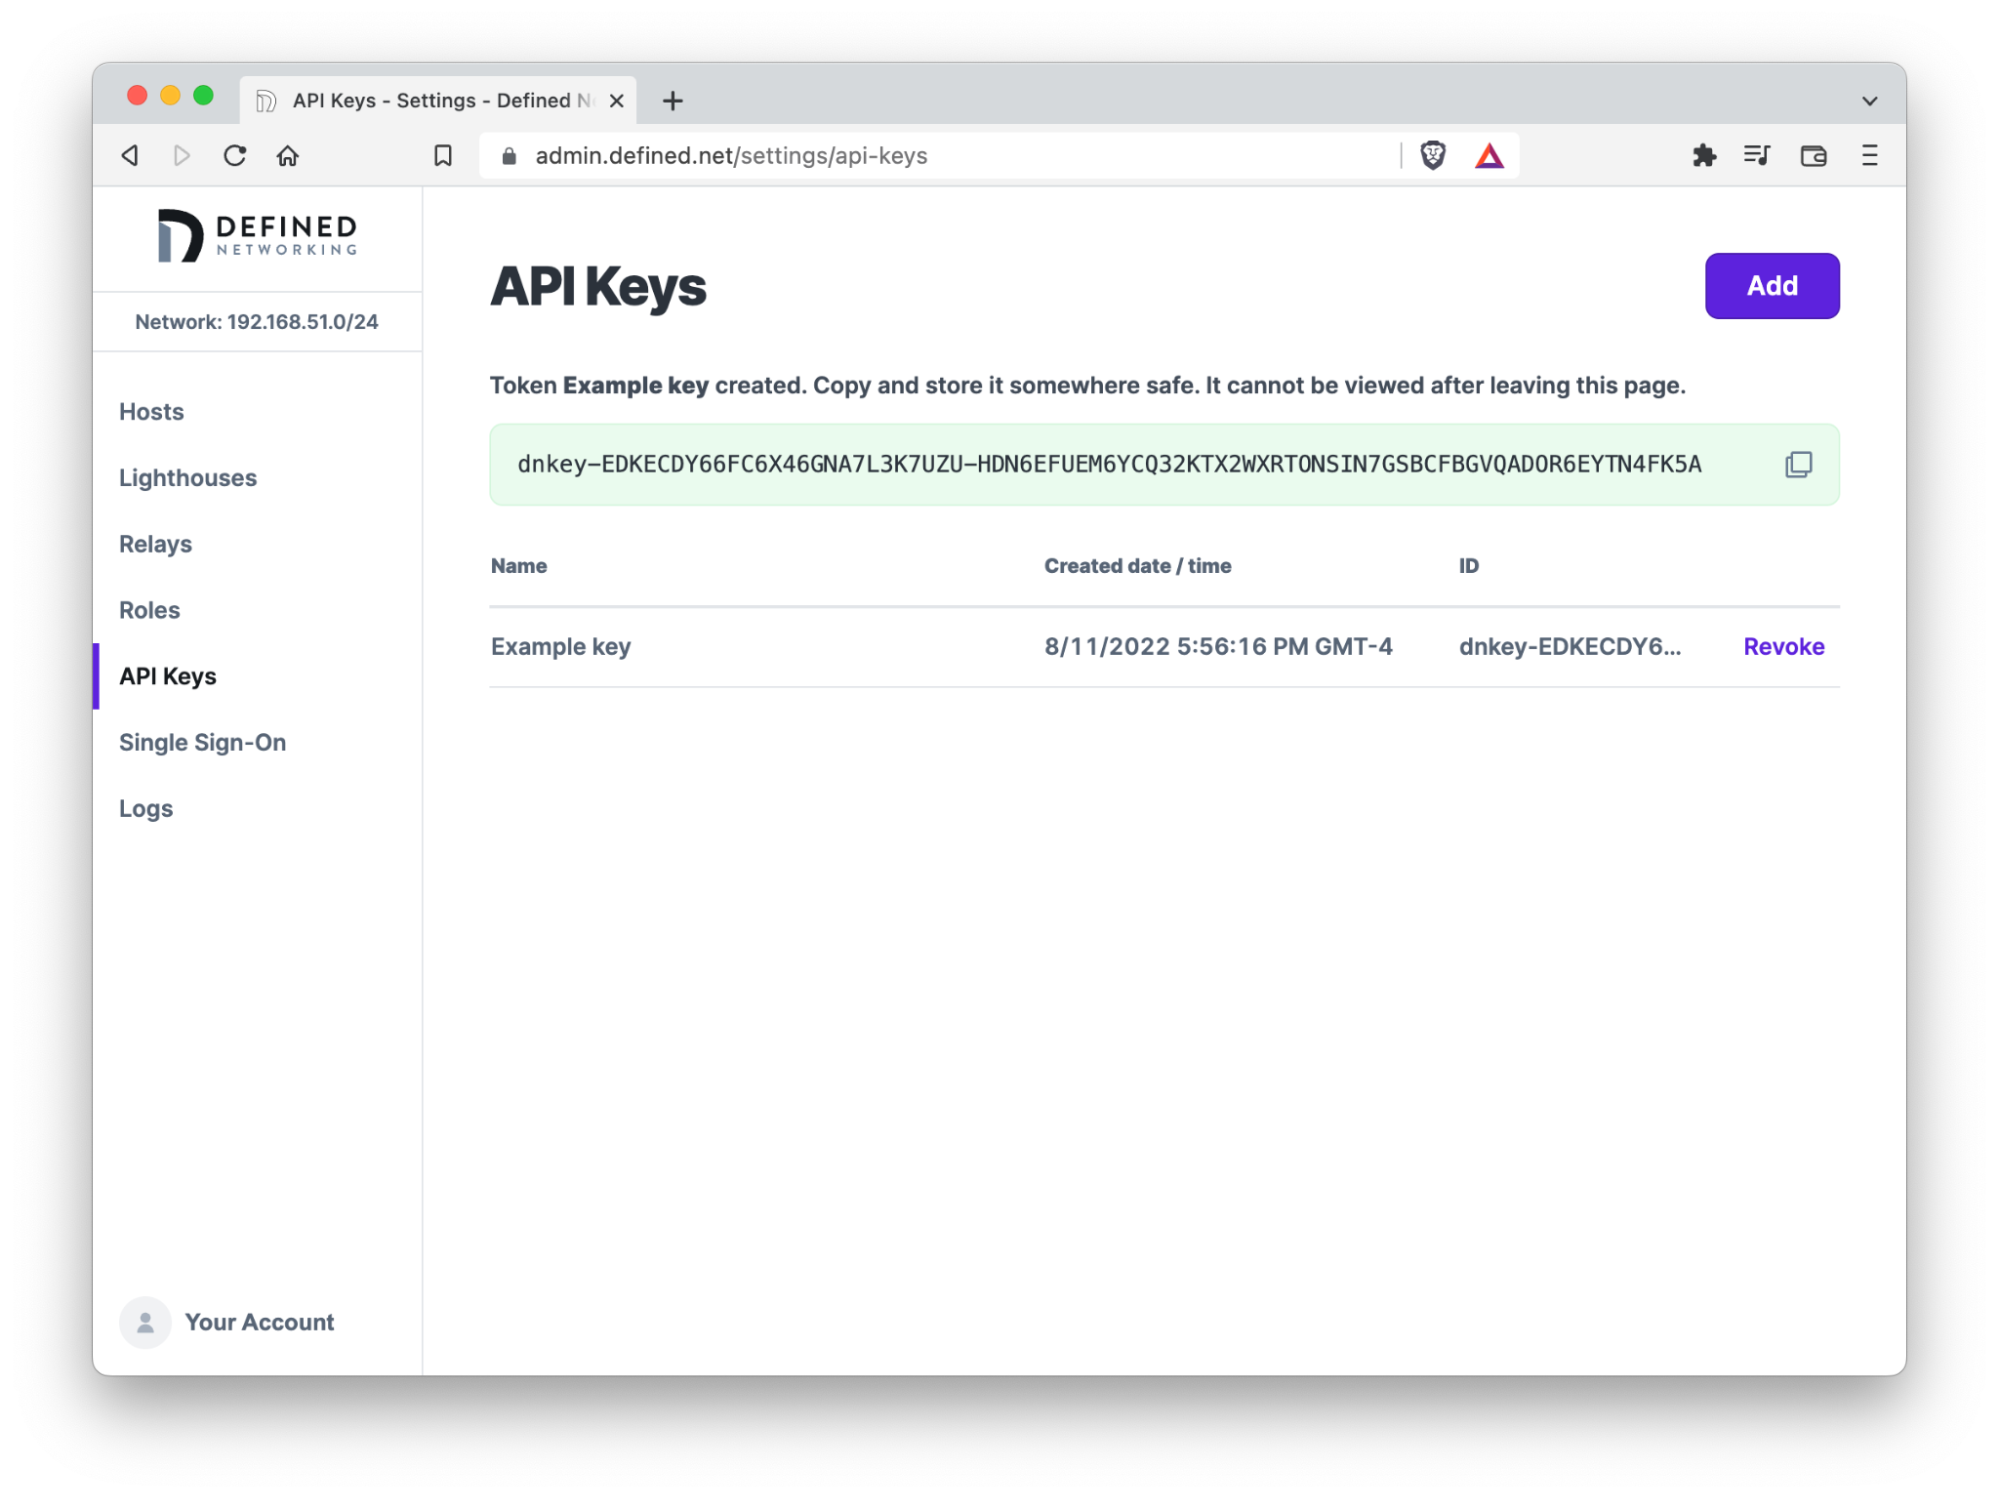 The admin panel opened to the API Keys page with a new API key shown